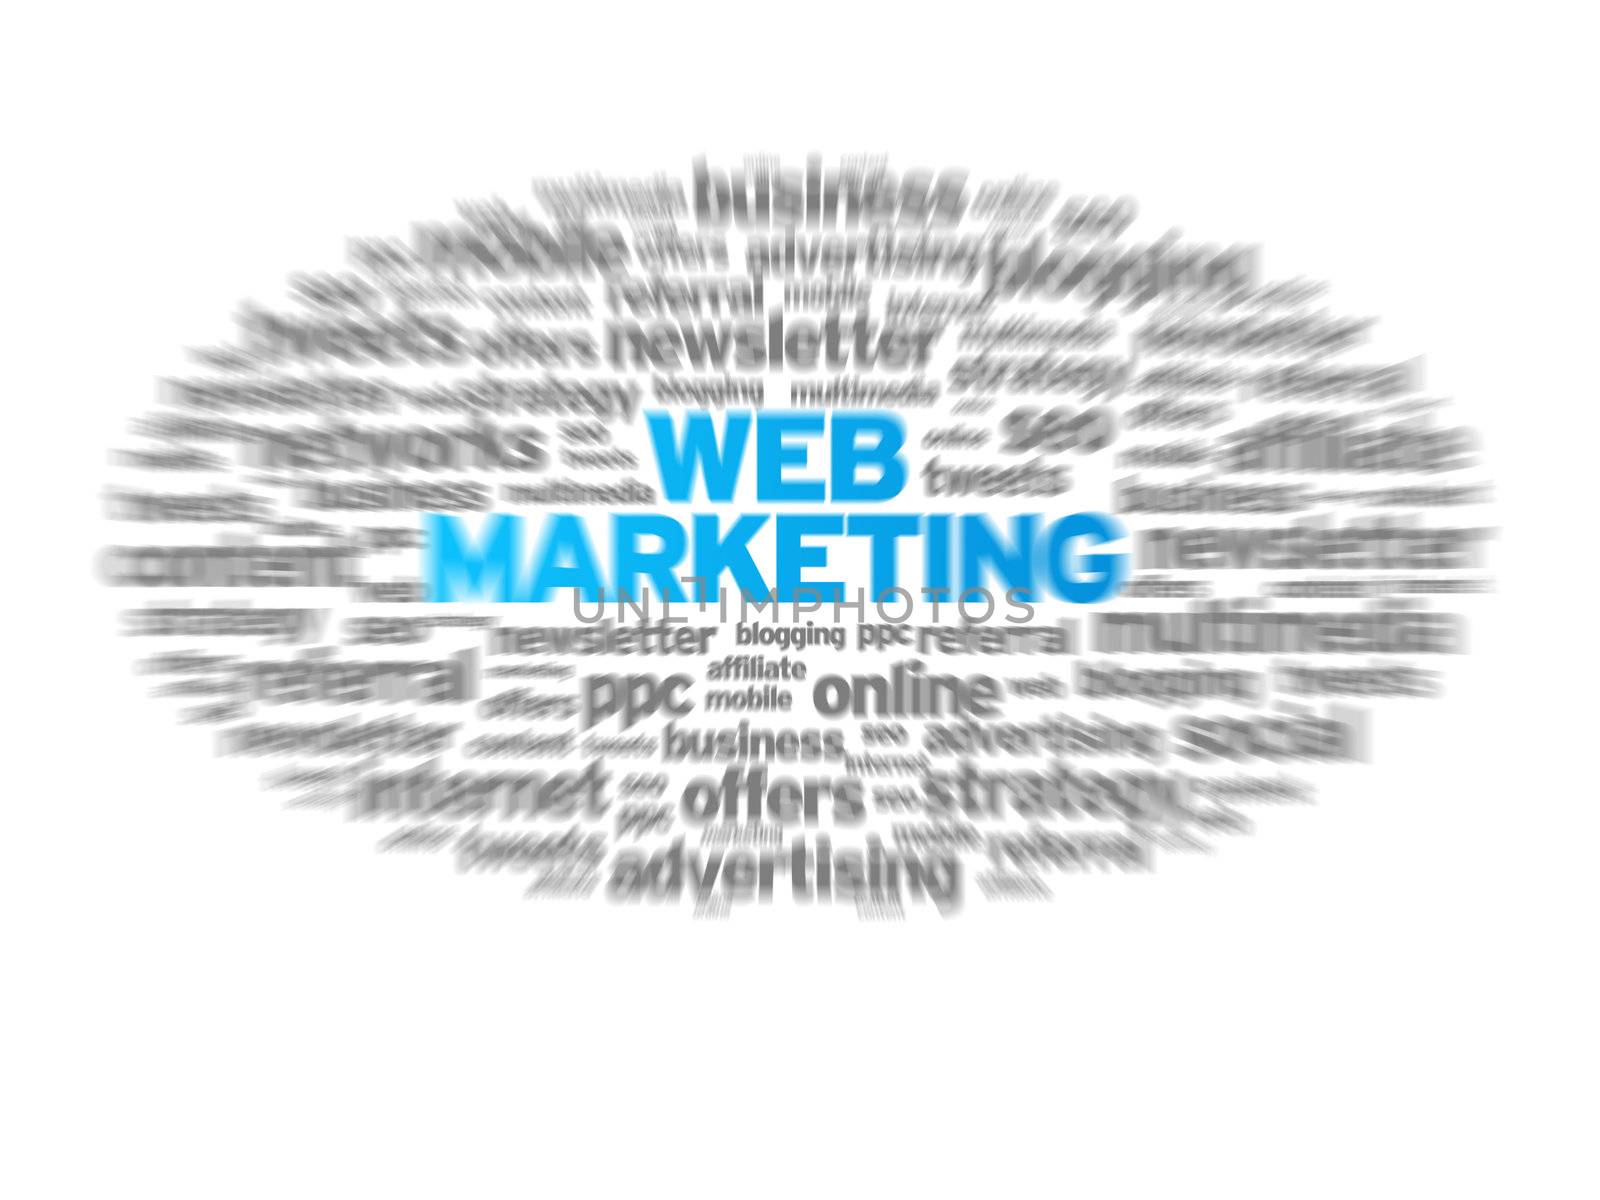 Web Marketing blurred tag cloud on white background.